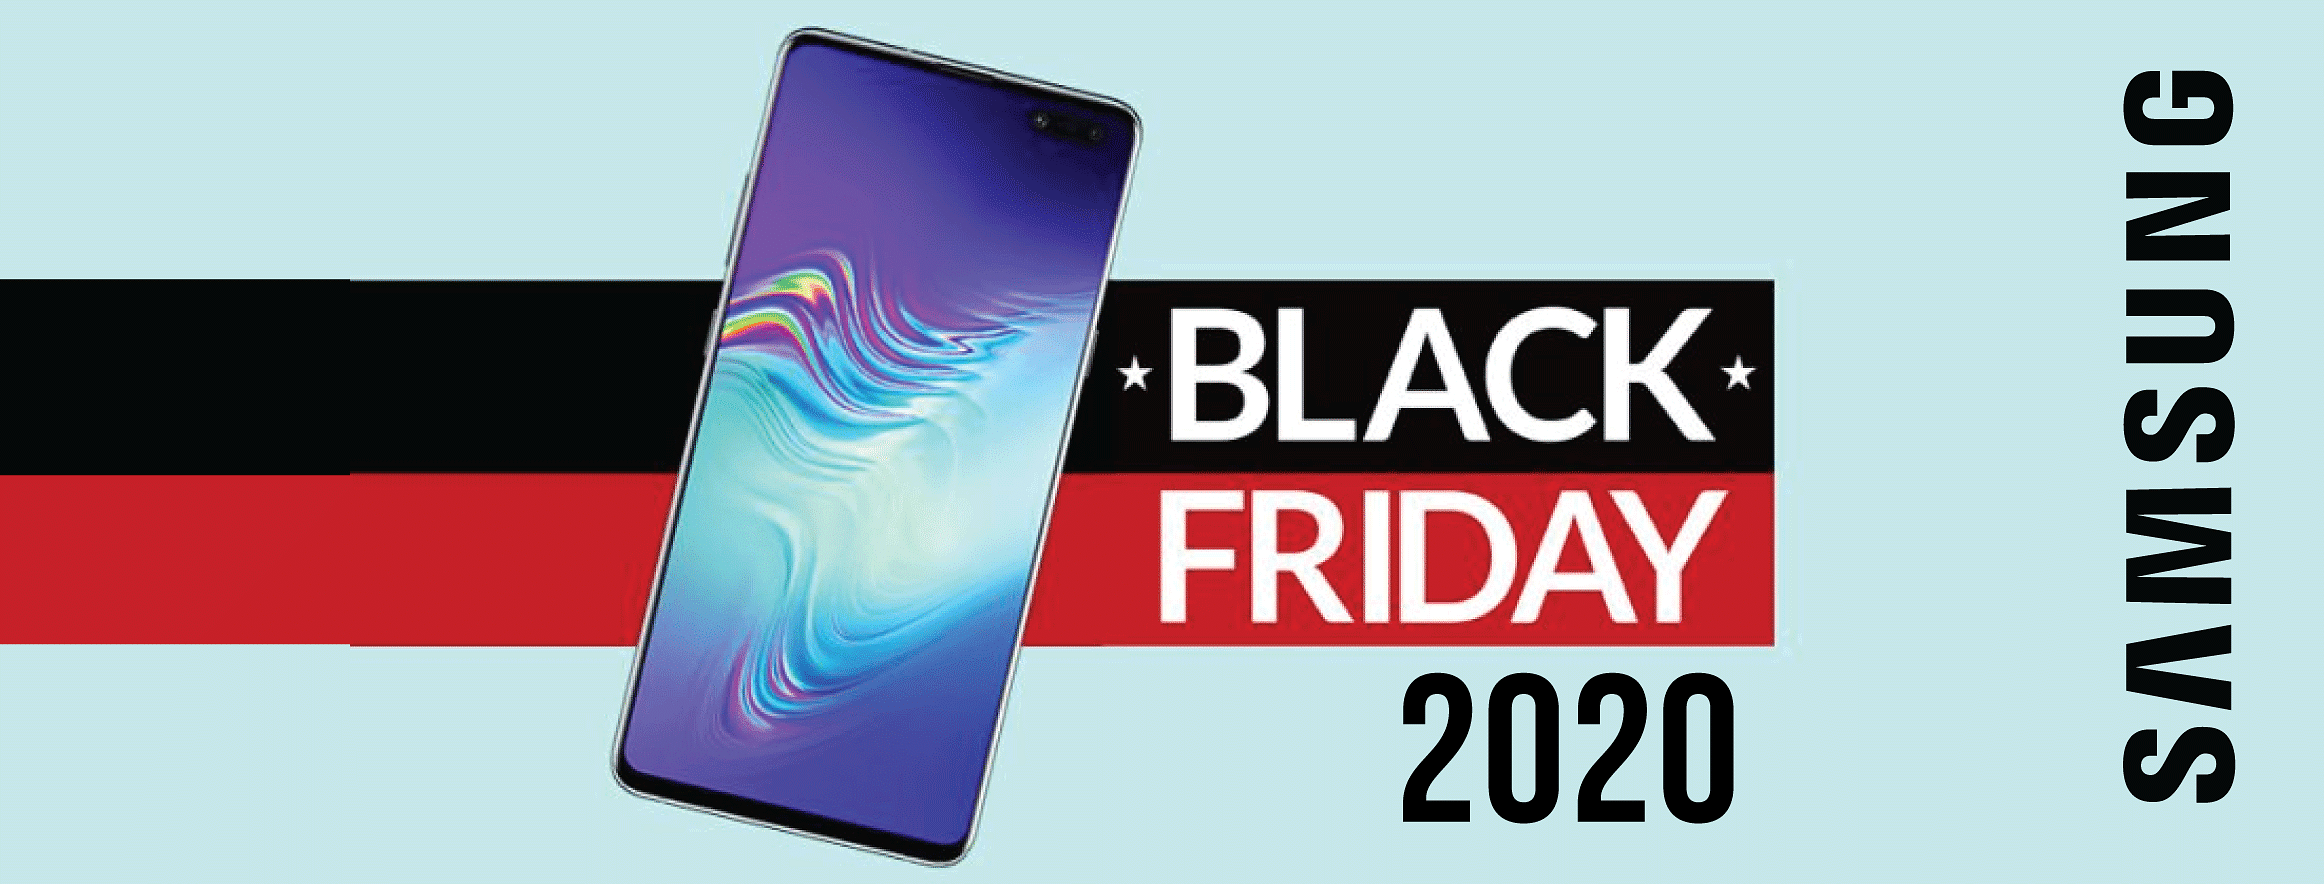 Samsung Black Friday 2020 Sale, Deal and Ads: Flat 50% off on Home - When Will Samsung Black Friday Deals End